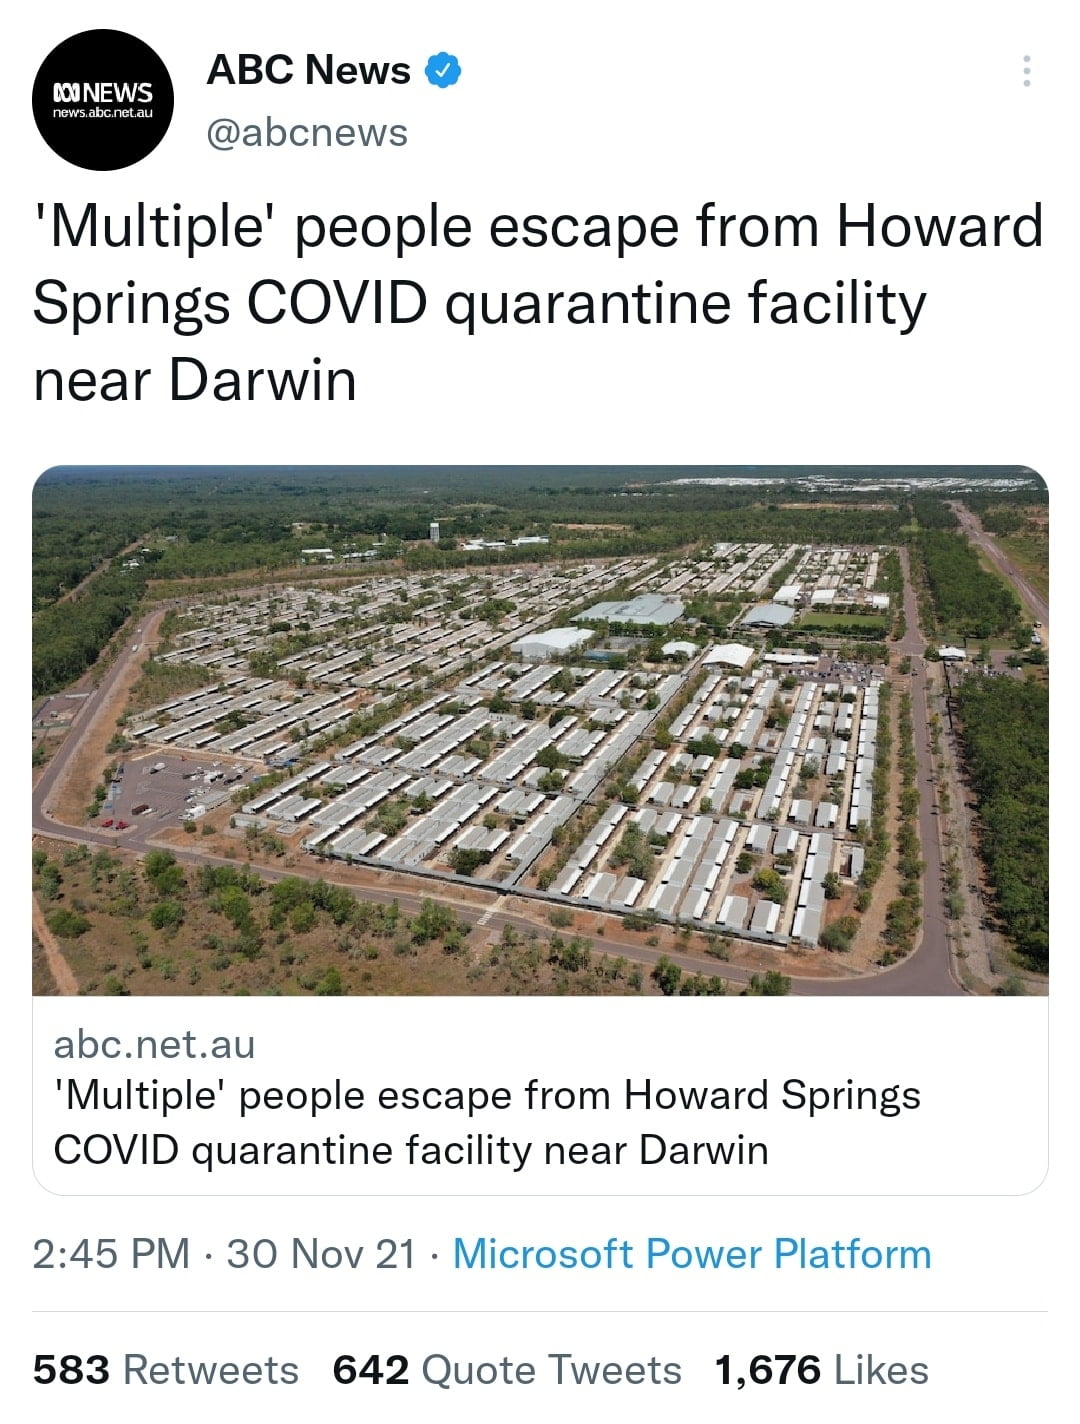 Several detainees escaped from Australian COVID quarantine camp